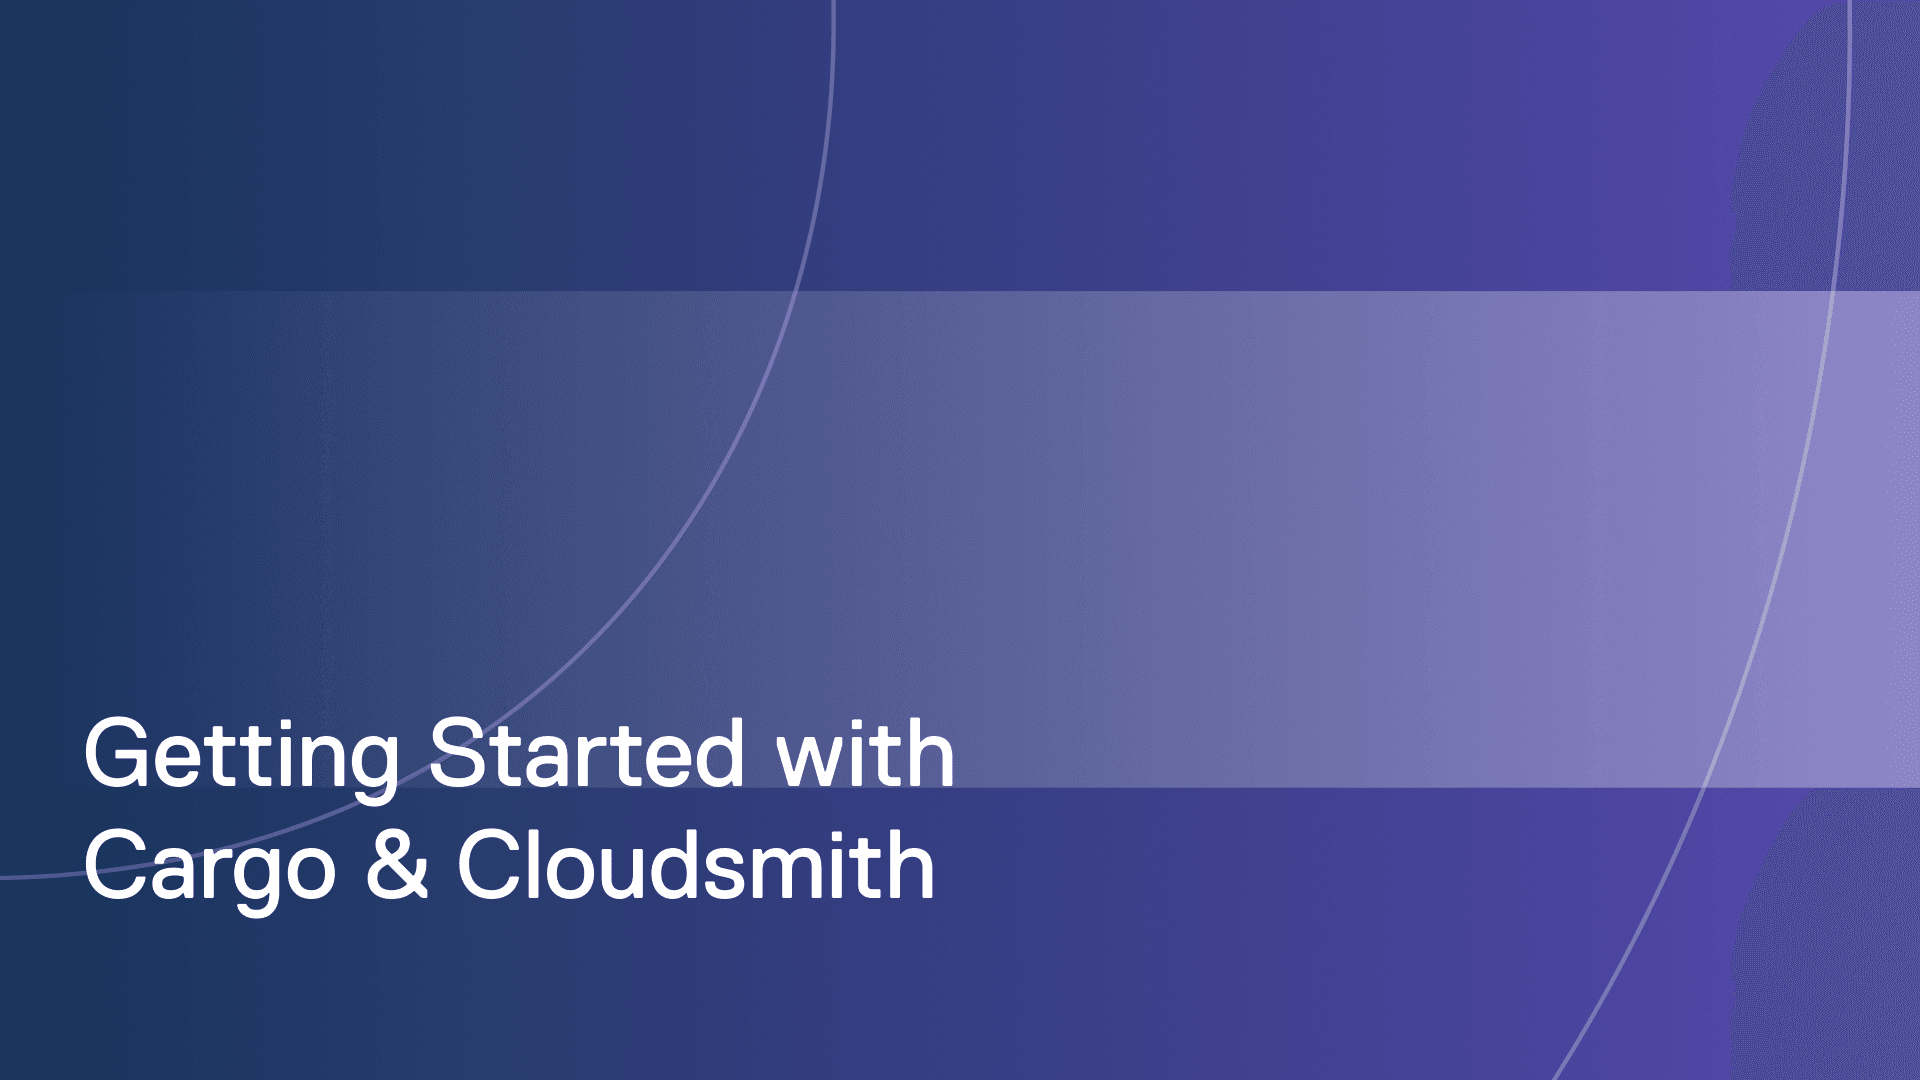 Getting started with Cargo and Cloudsmith